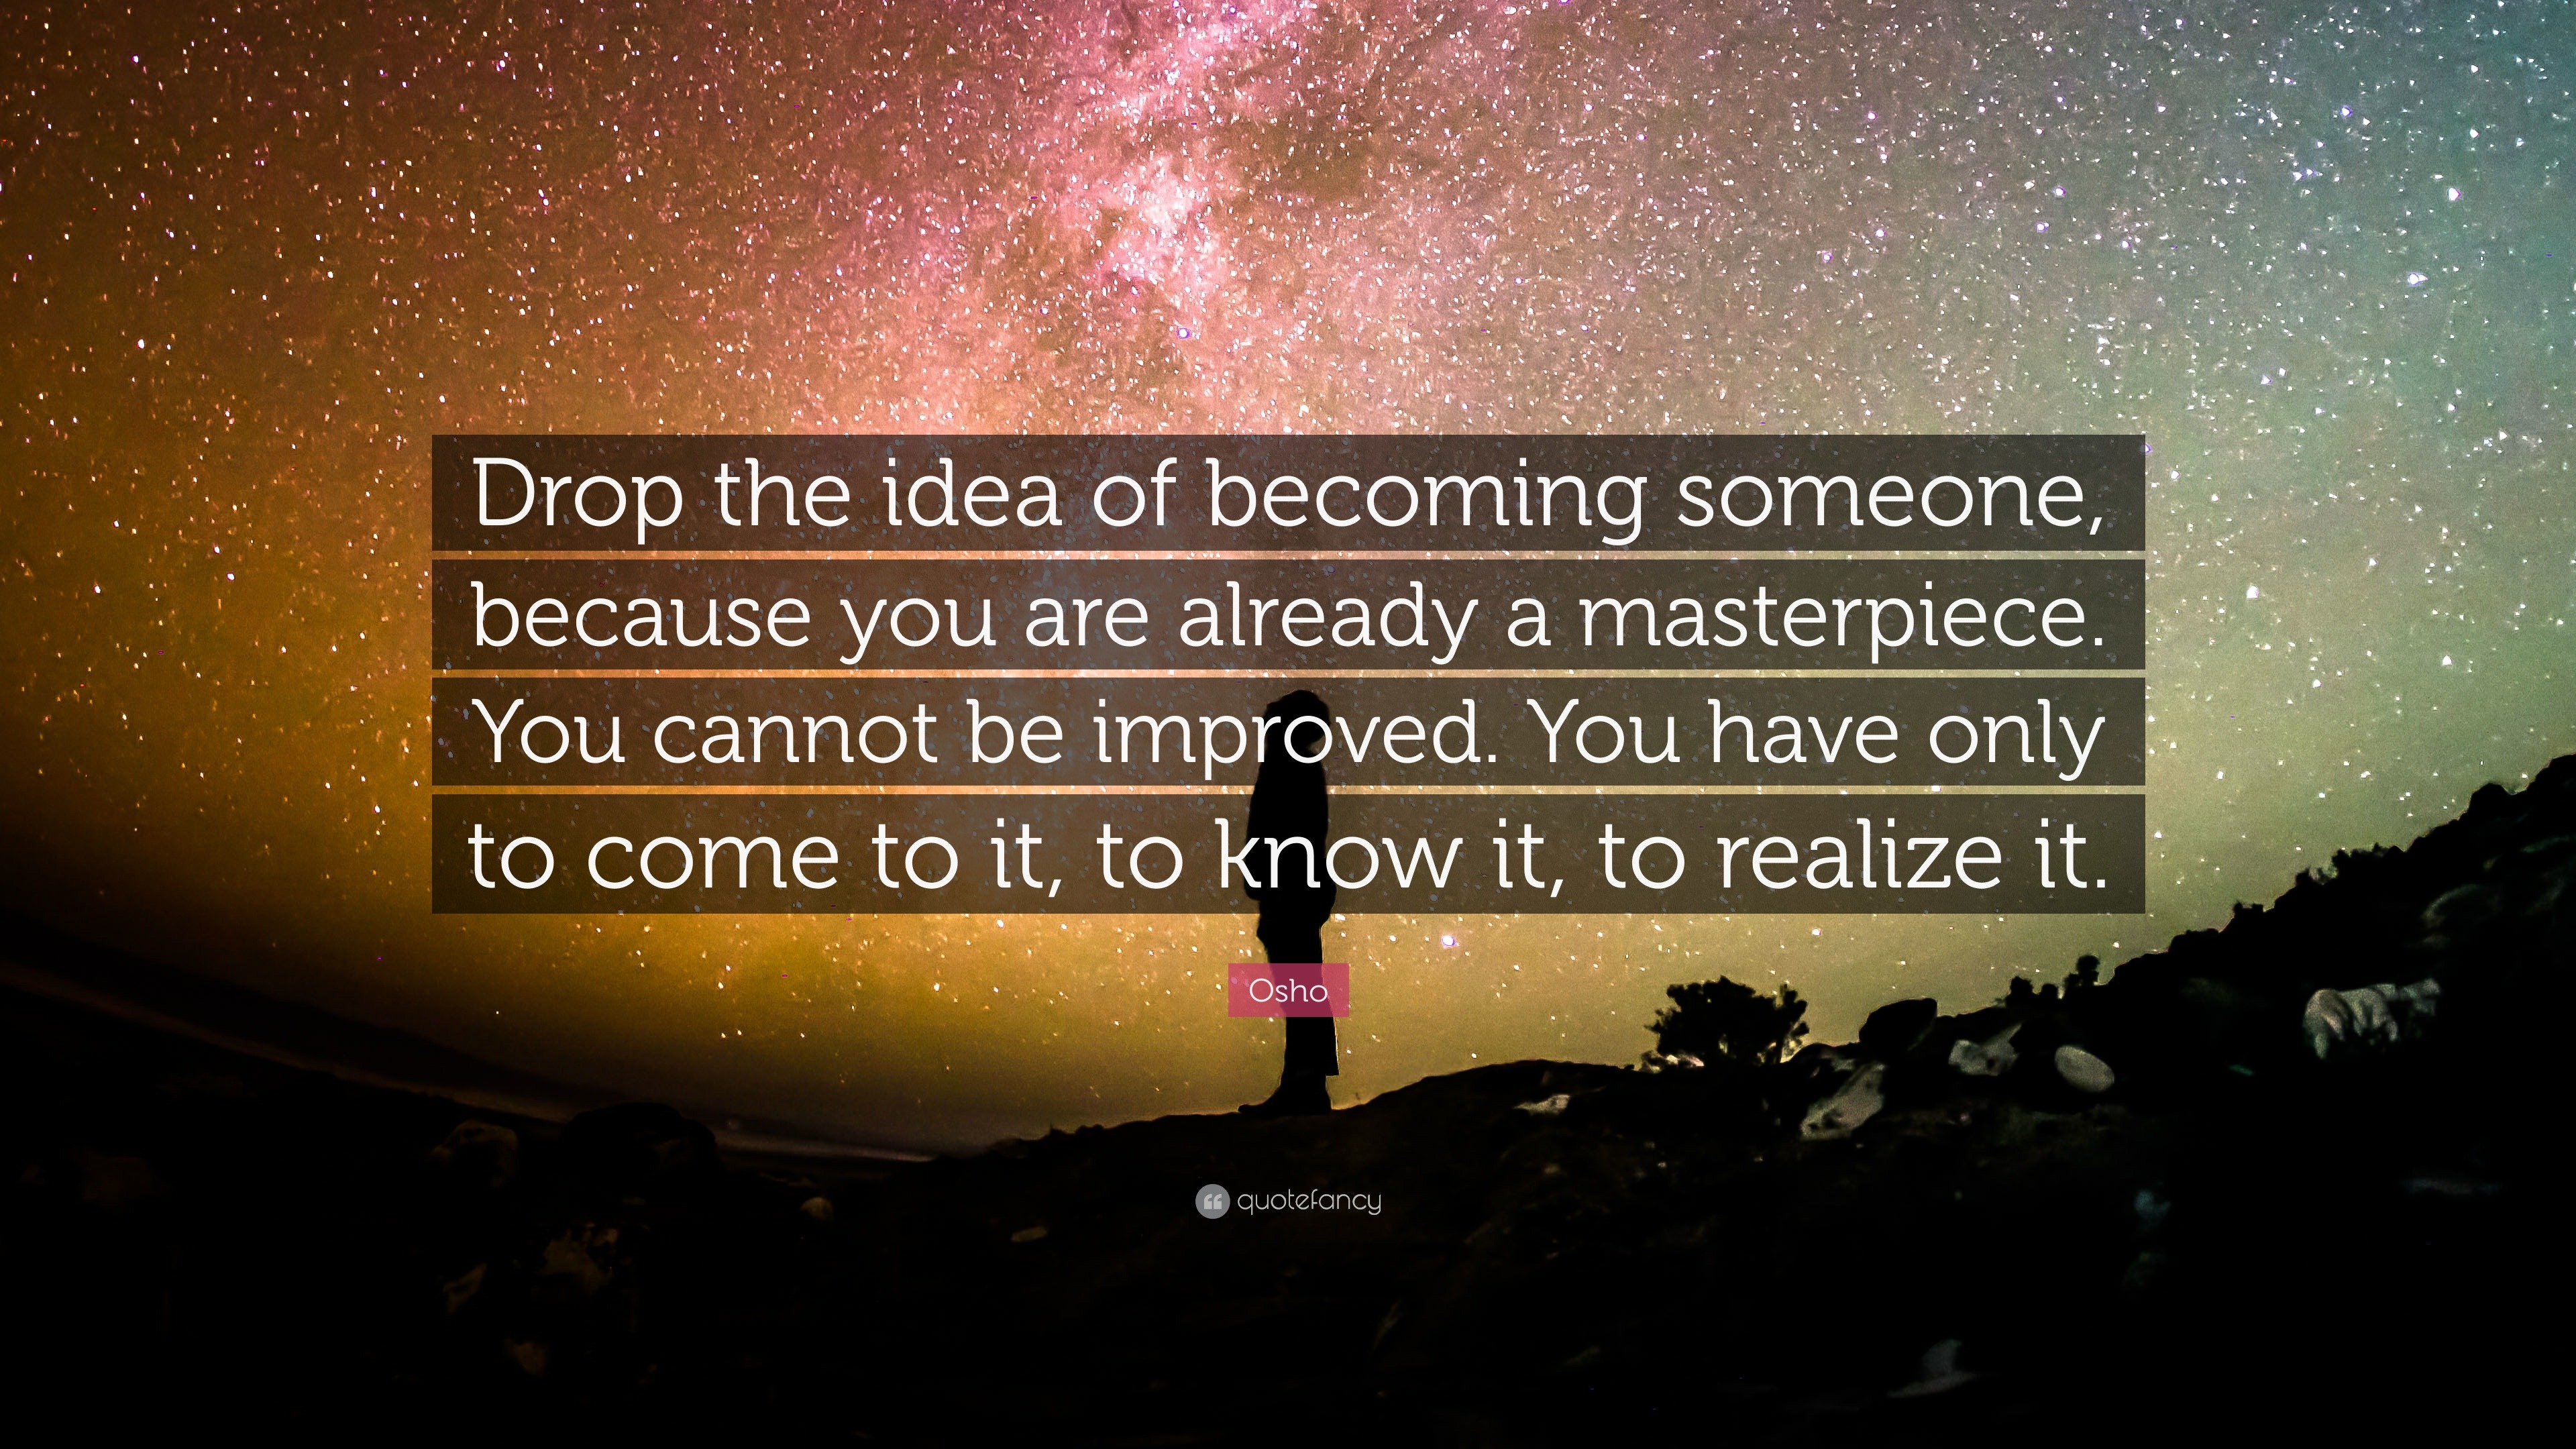 Osho Quotes (41 wallpapers) - Quotefancy